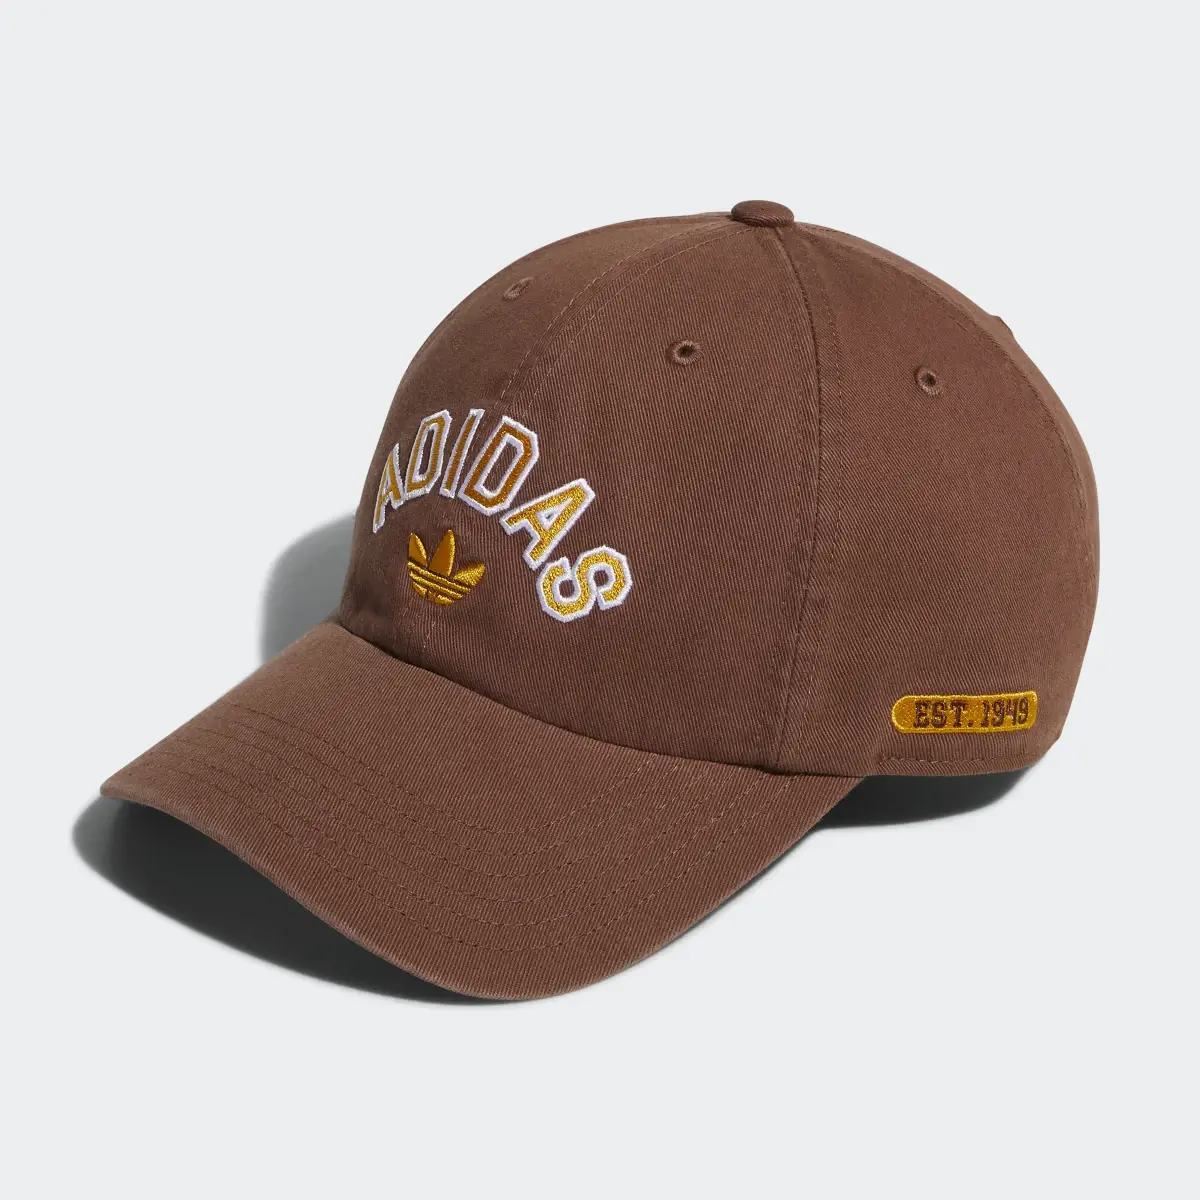 Adidas Relaxed New Prep Hat. 2